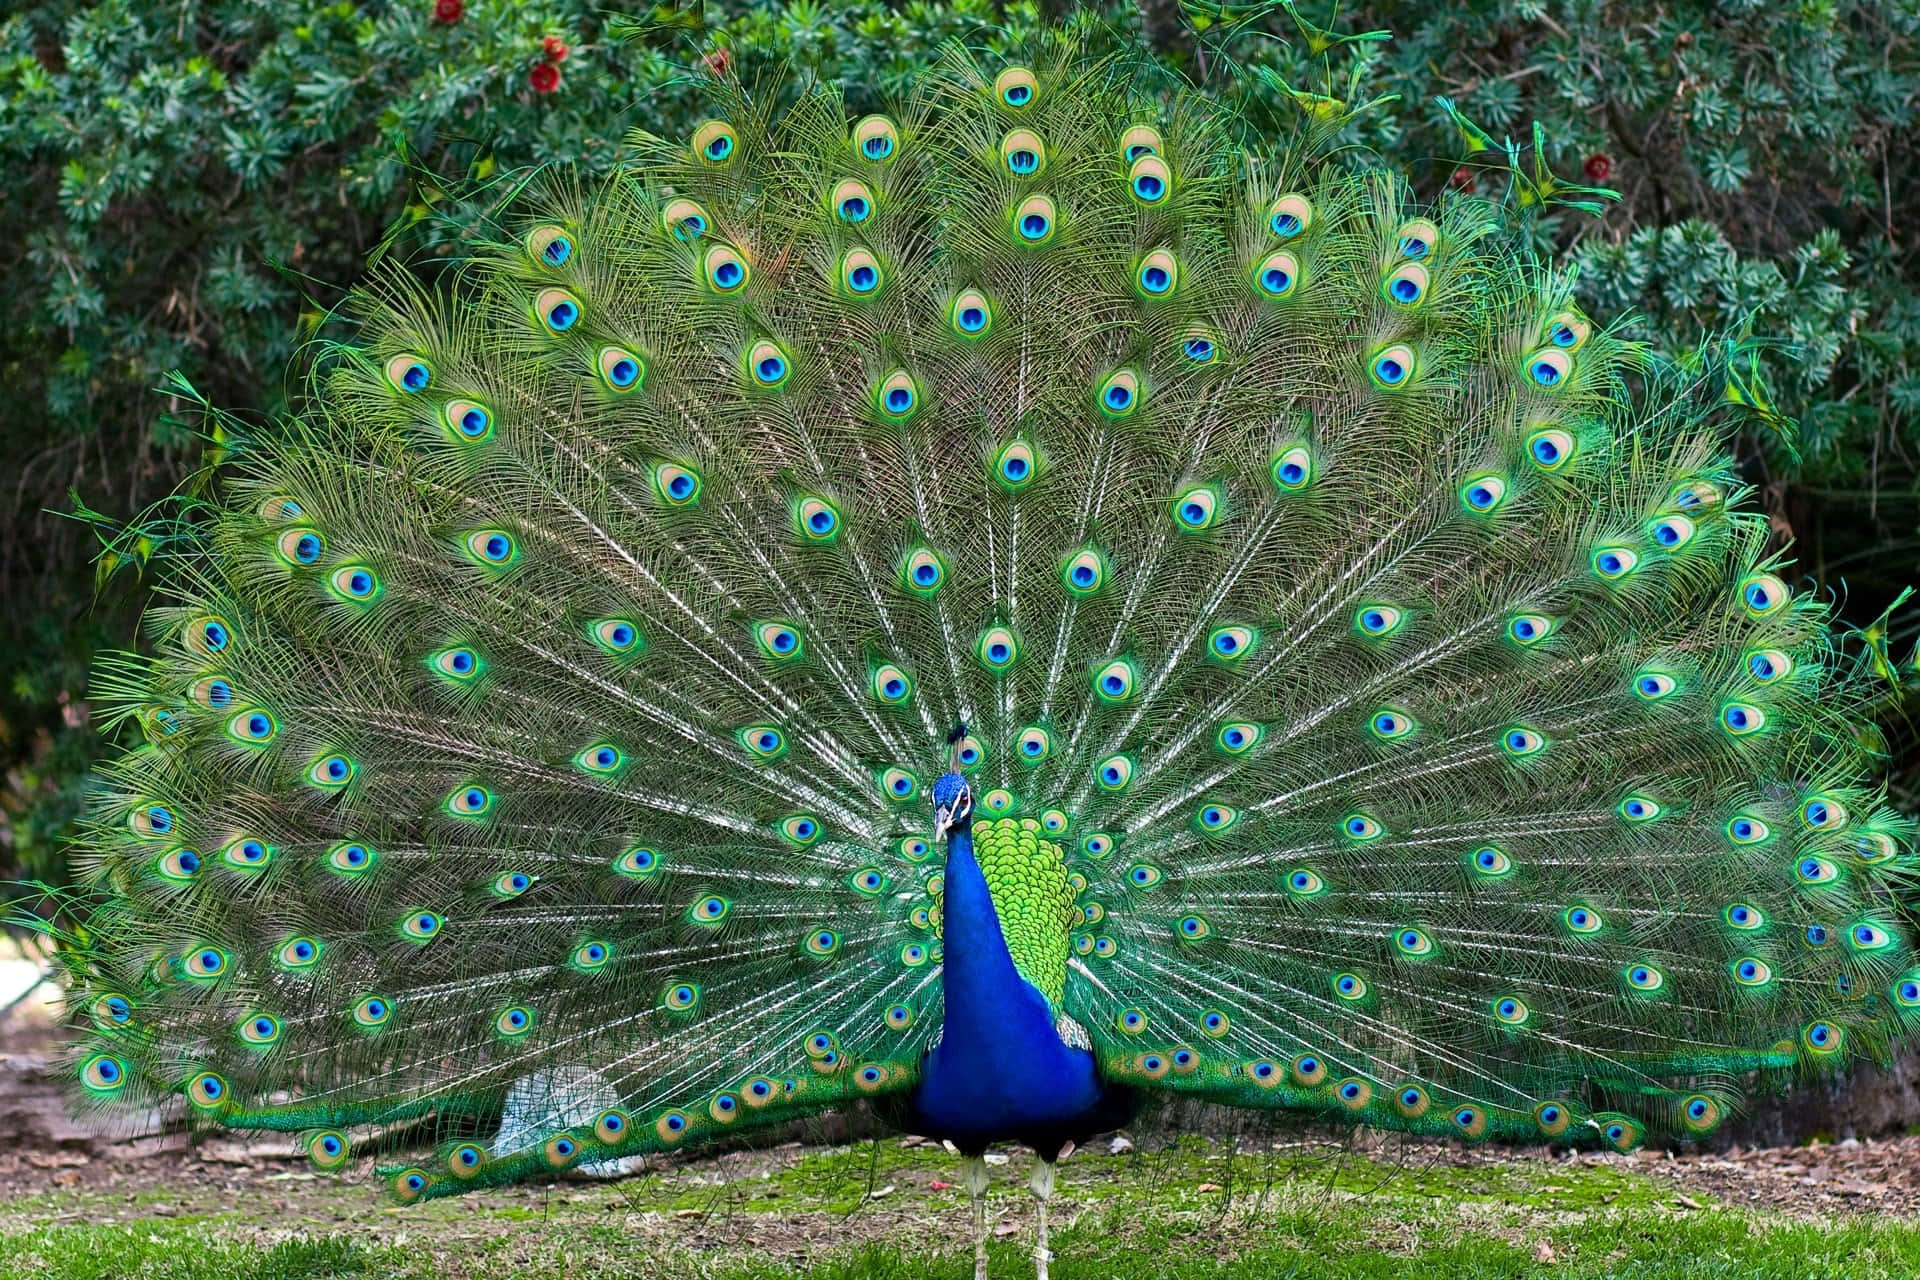 "Beautiful Feathers of the Majestic Peacock"